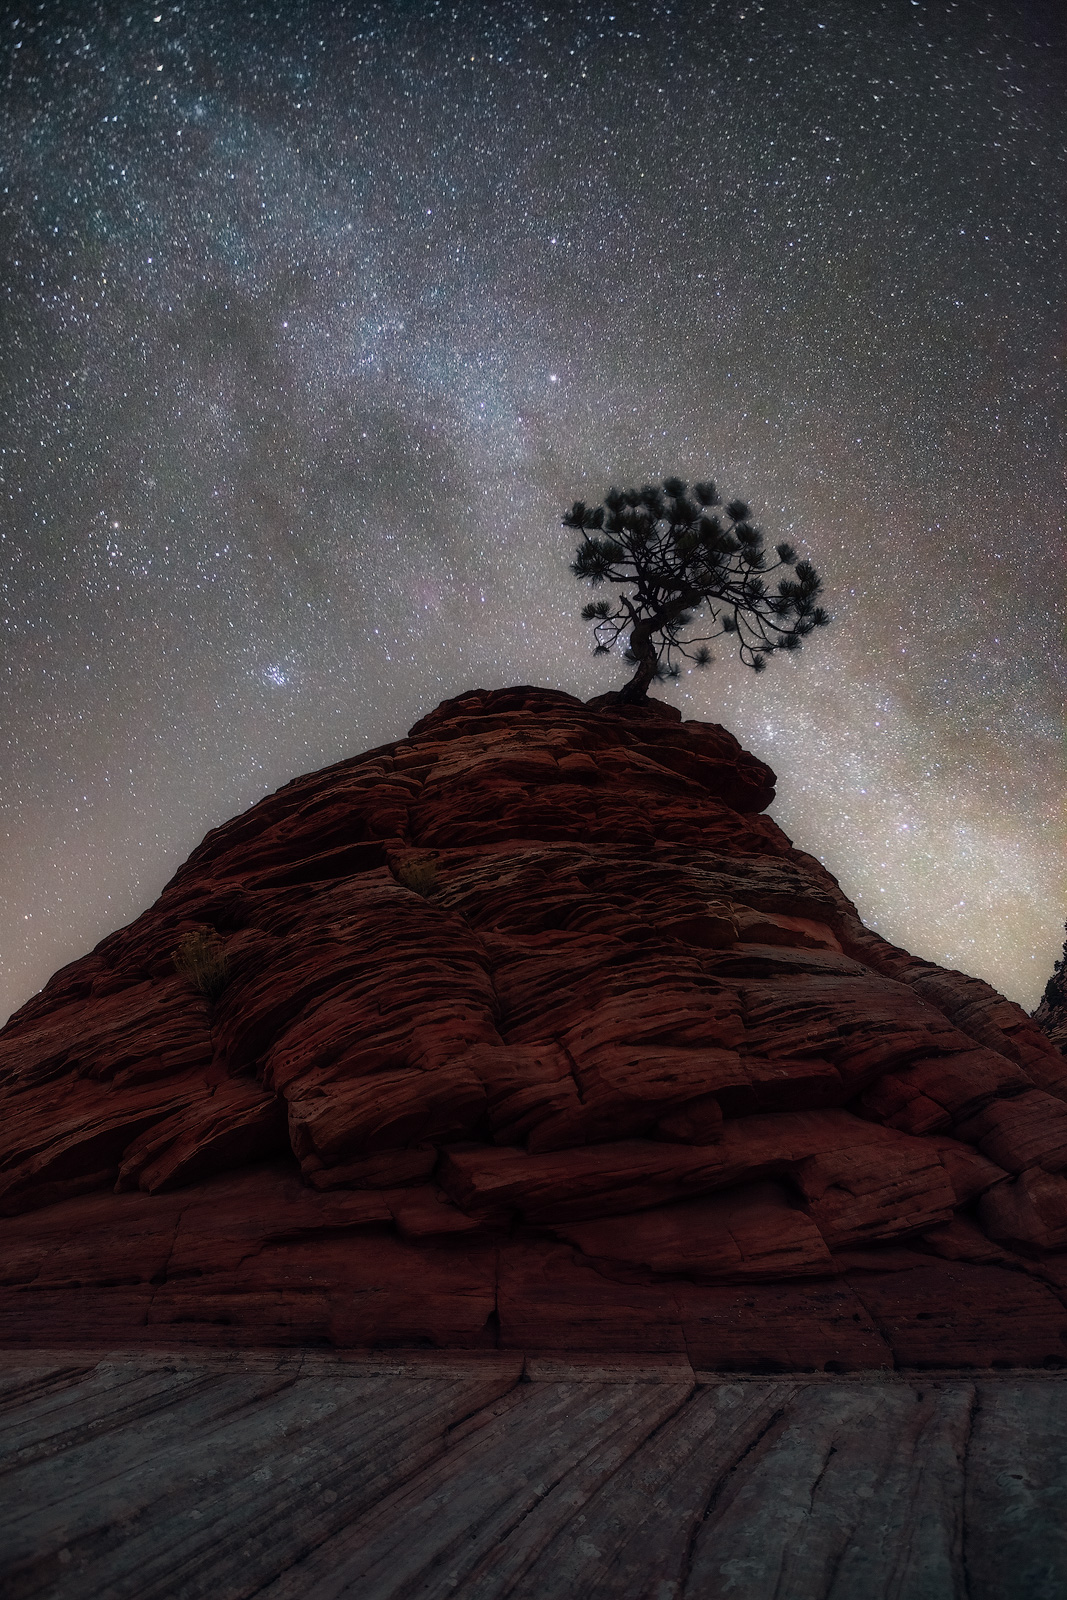 A lone tree silhouetted in front of the Milky Way.